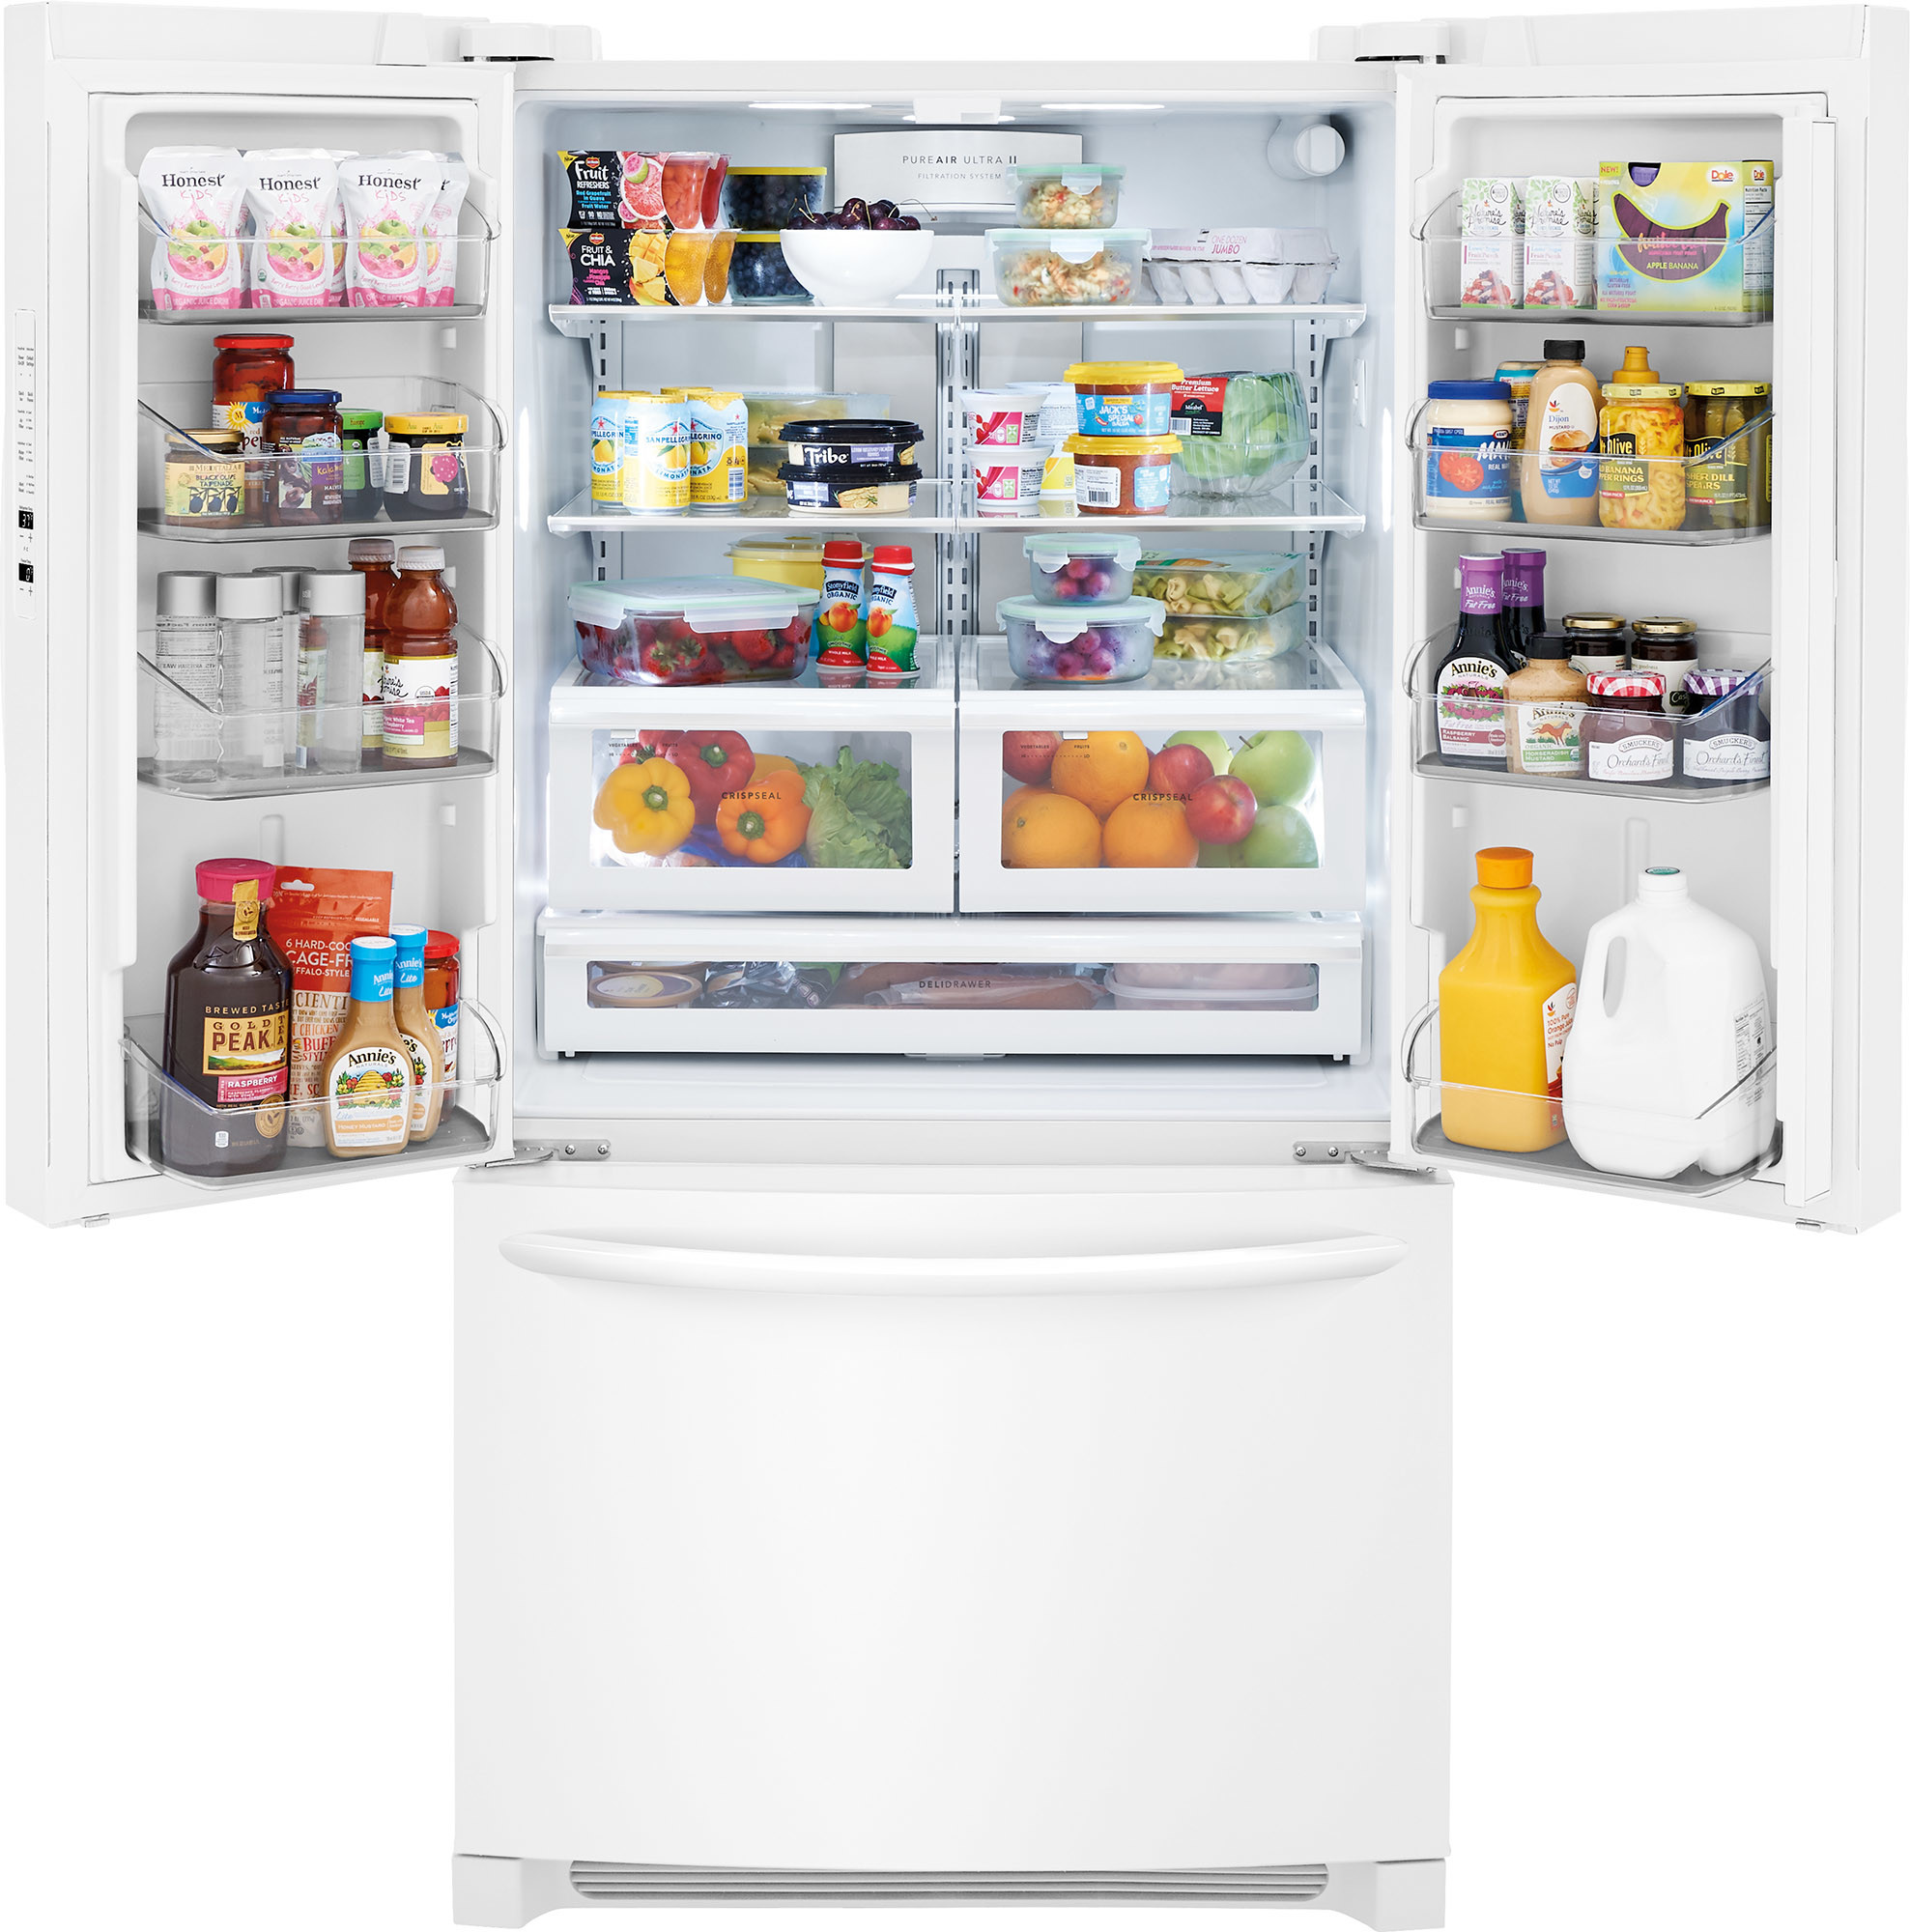 Frigidaire Gallery FGHN2868TF 28 Cu. Ft. Stainless French Door Refrigerator - image 2 of 7